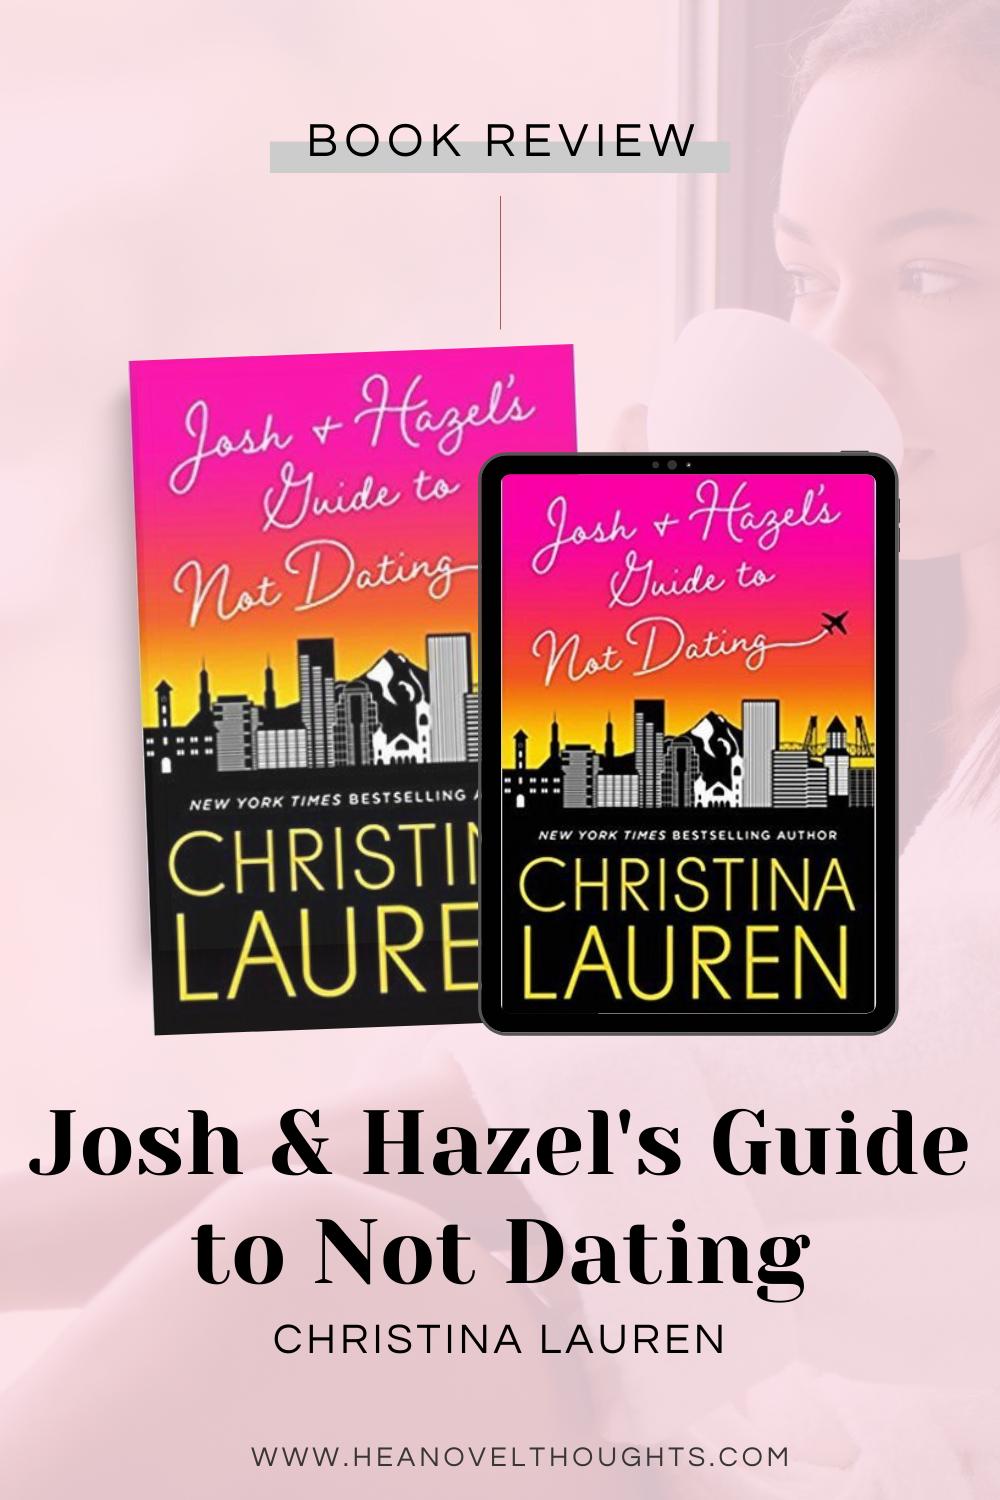 Josh and Hazel’s Guide to Not Dating